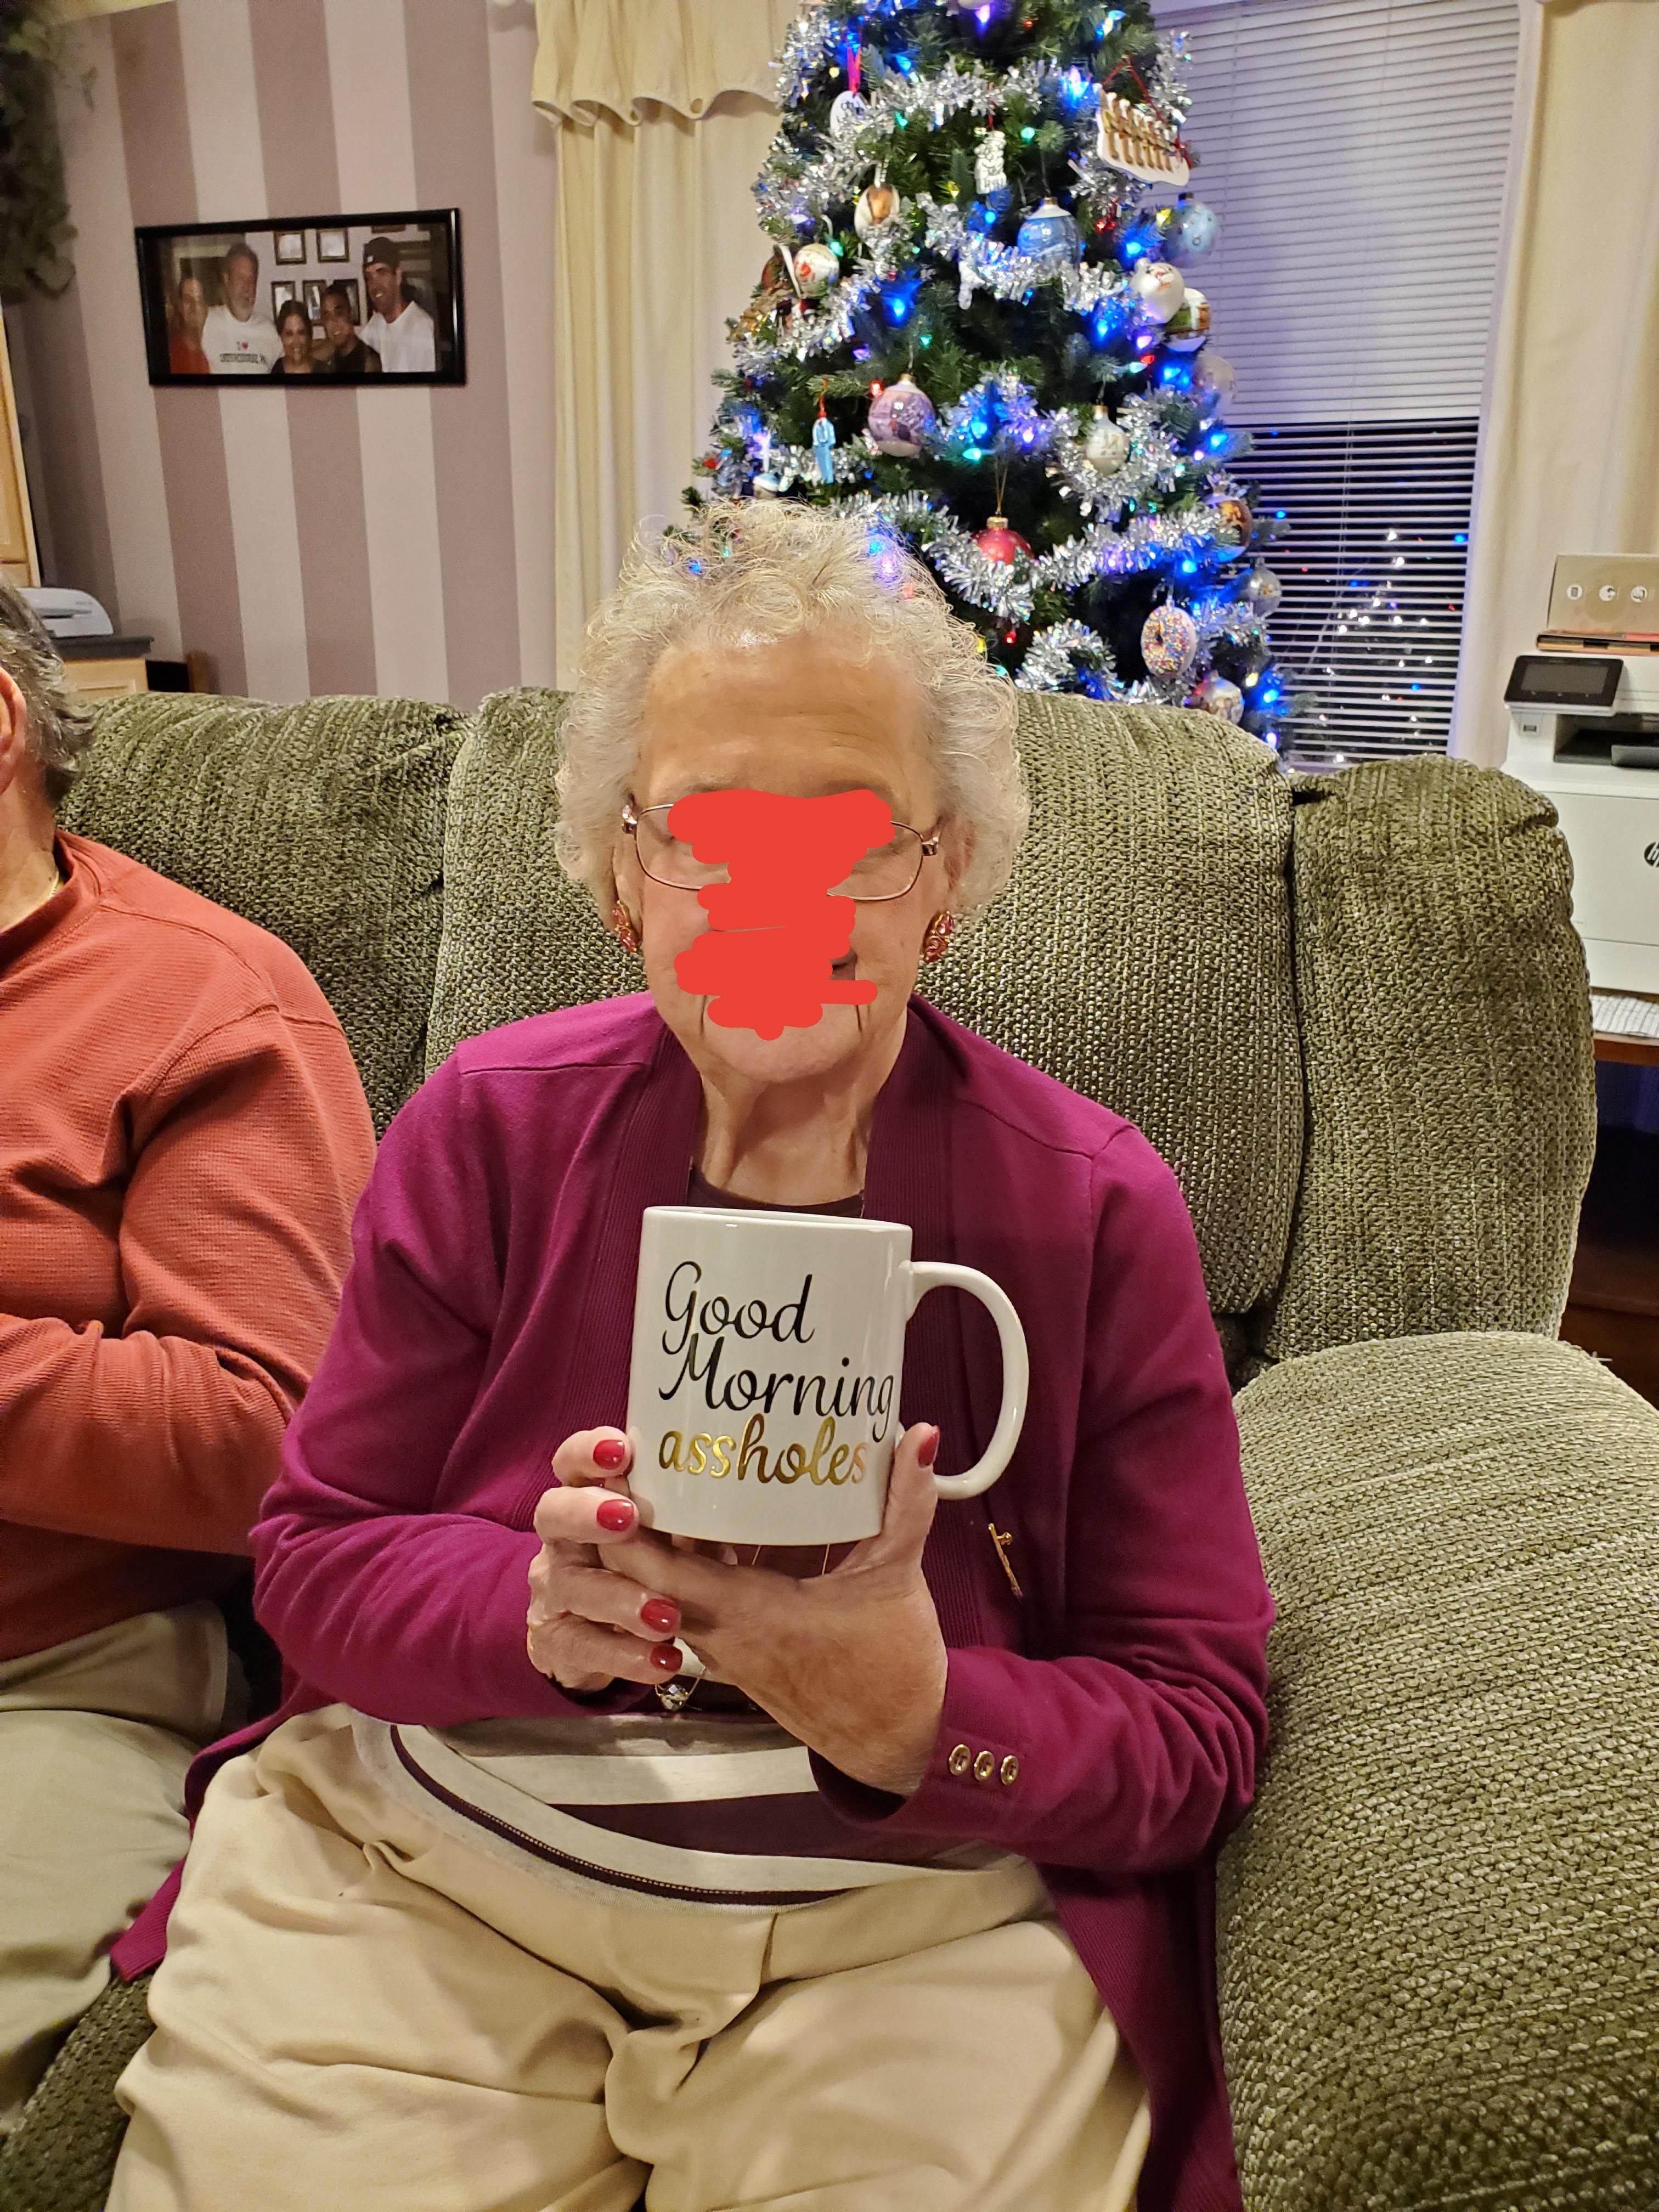 Despite the gift mix-up, Grandma insisted it was perfect for breakfast at her senior living home.